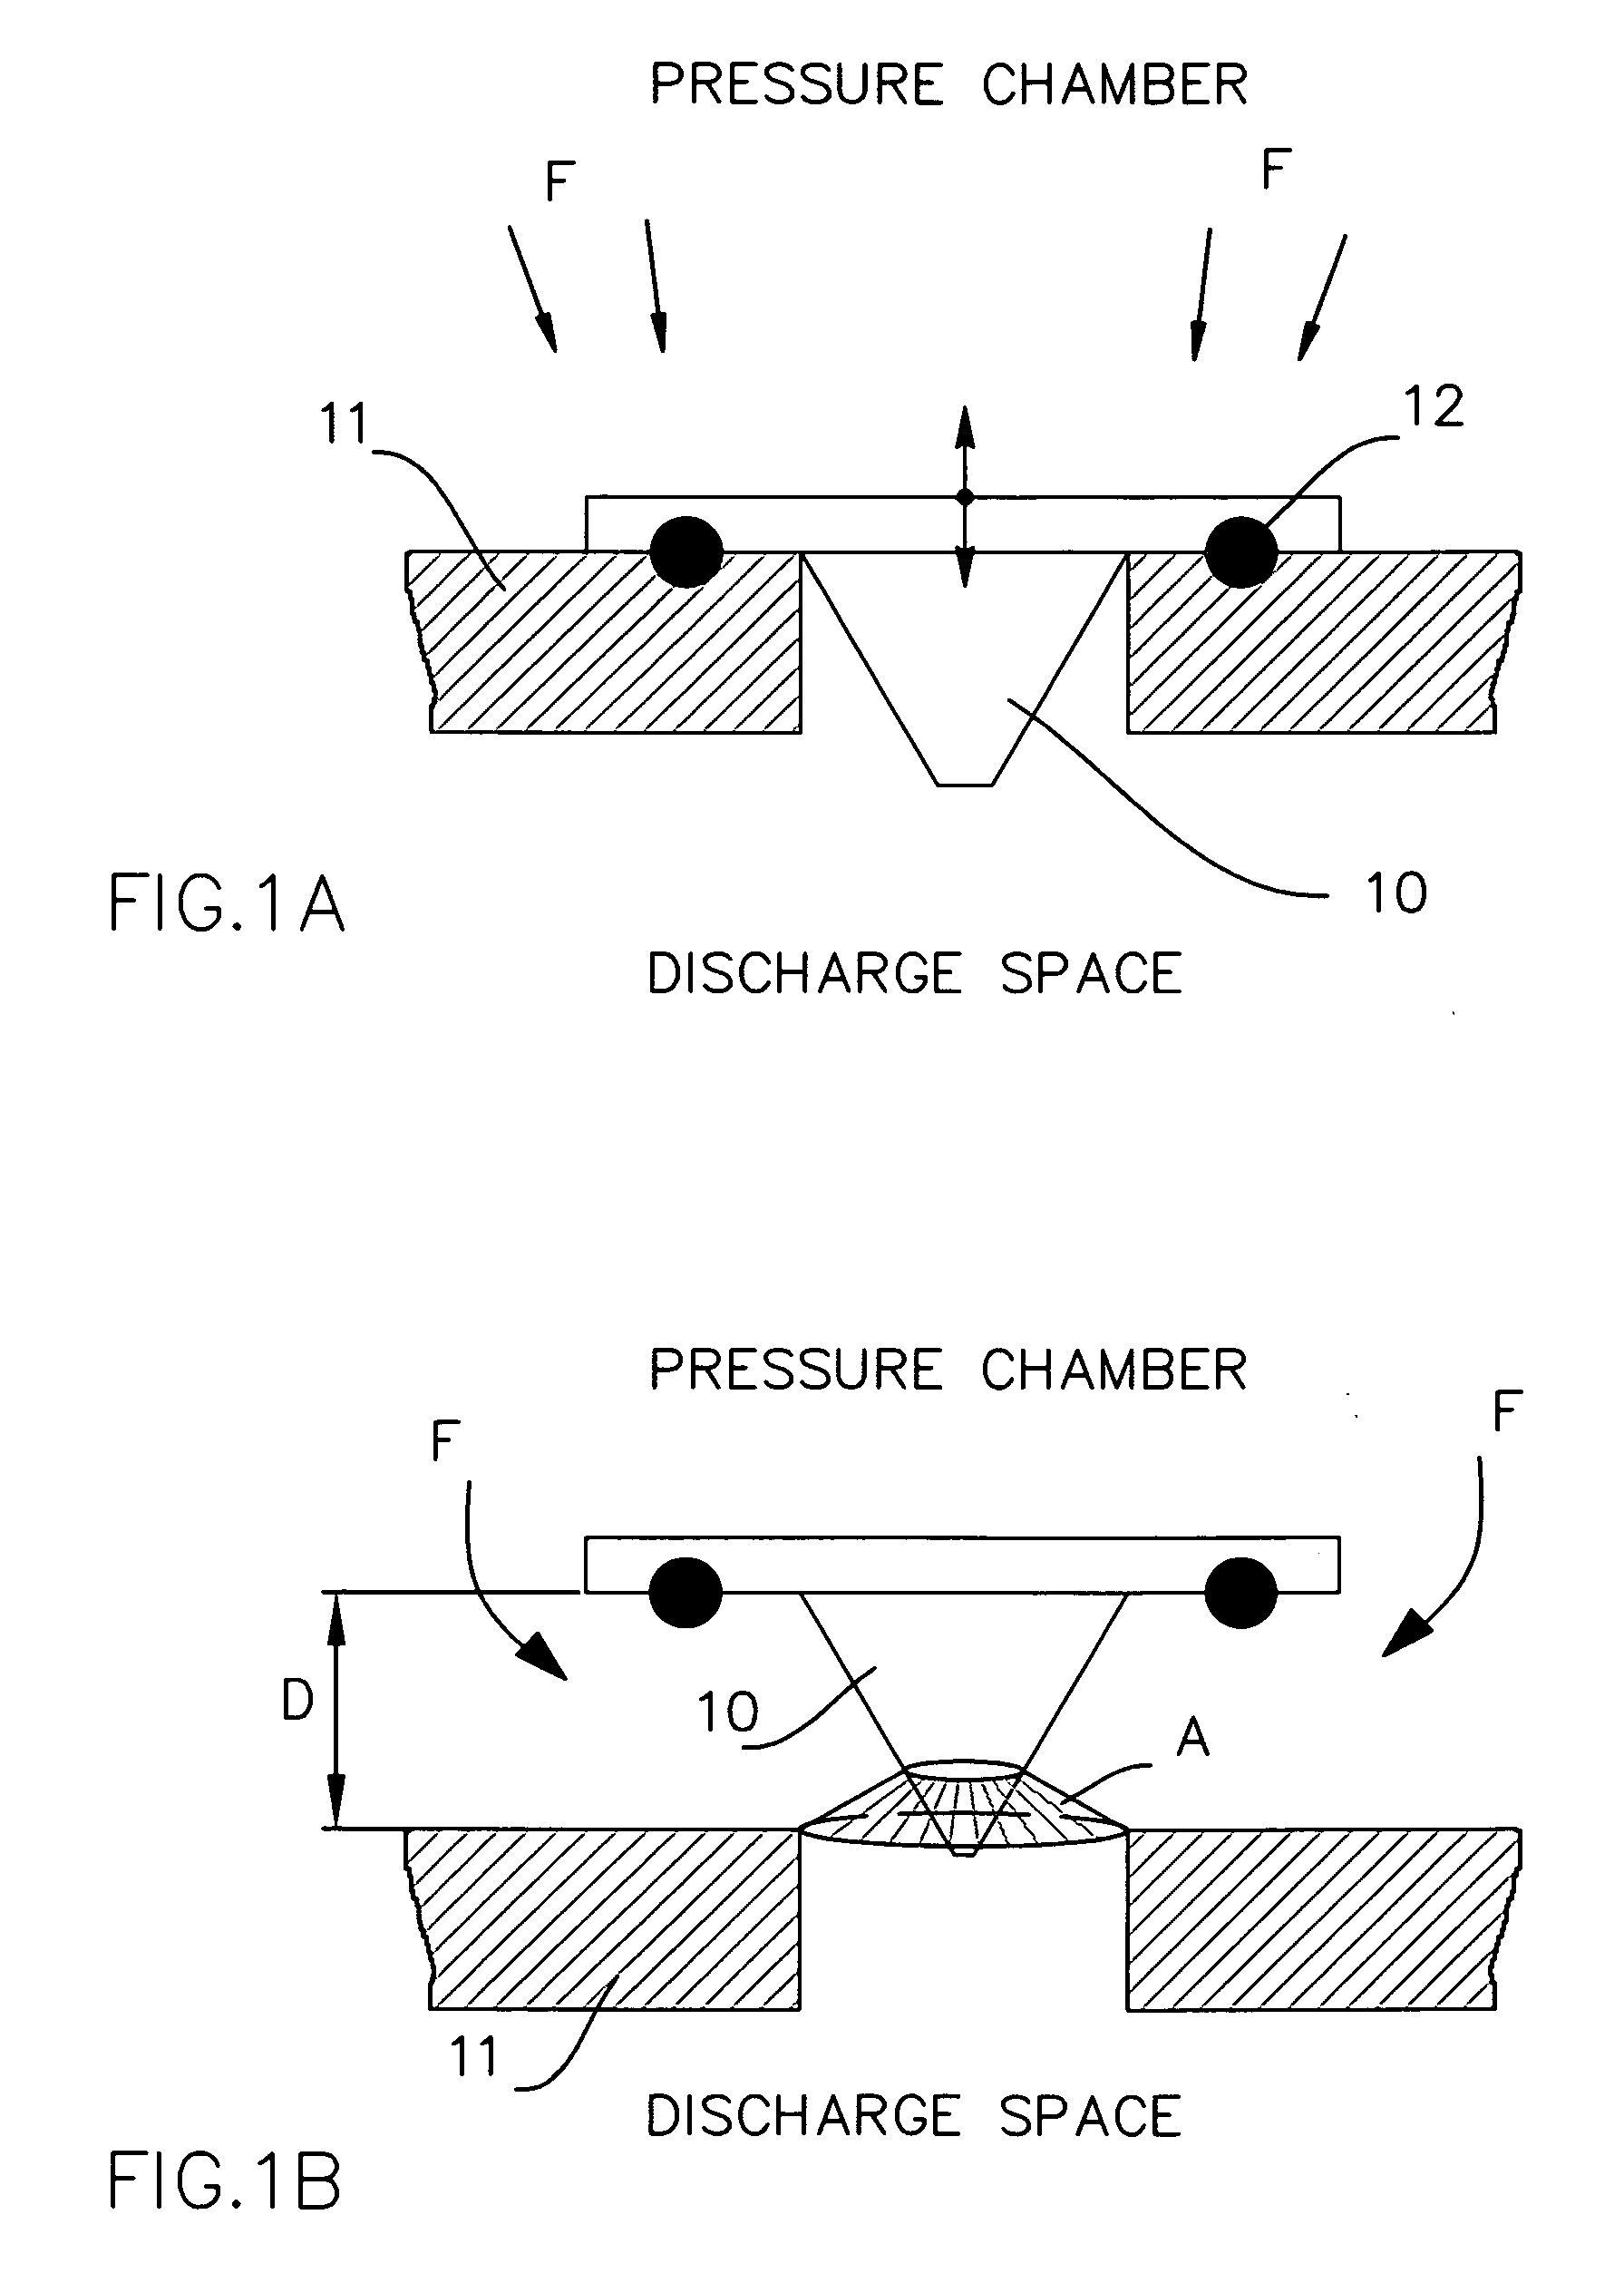 Tapered toroidal flow control valve and fuel metering device